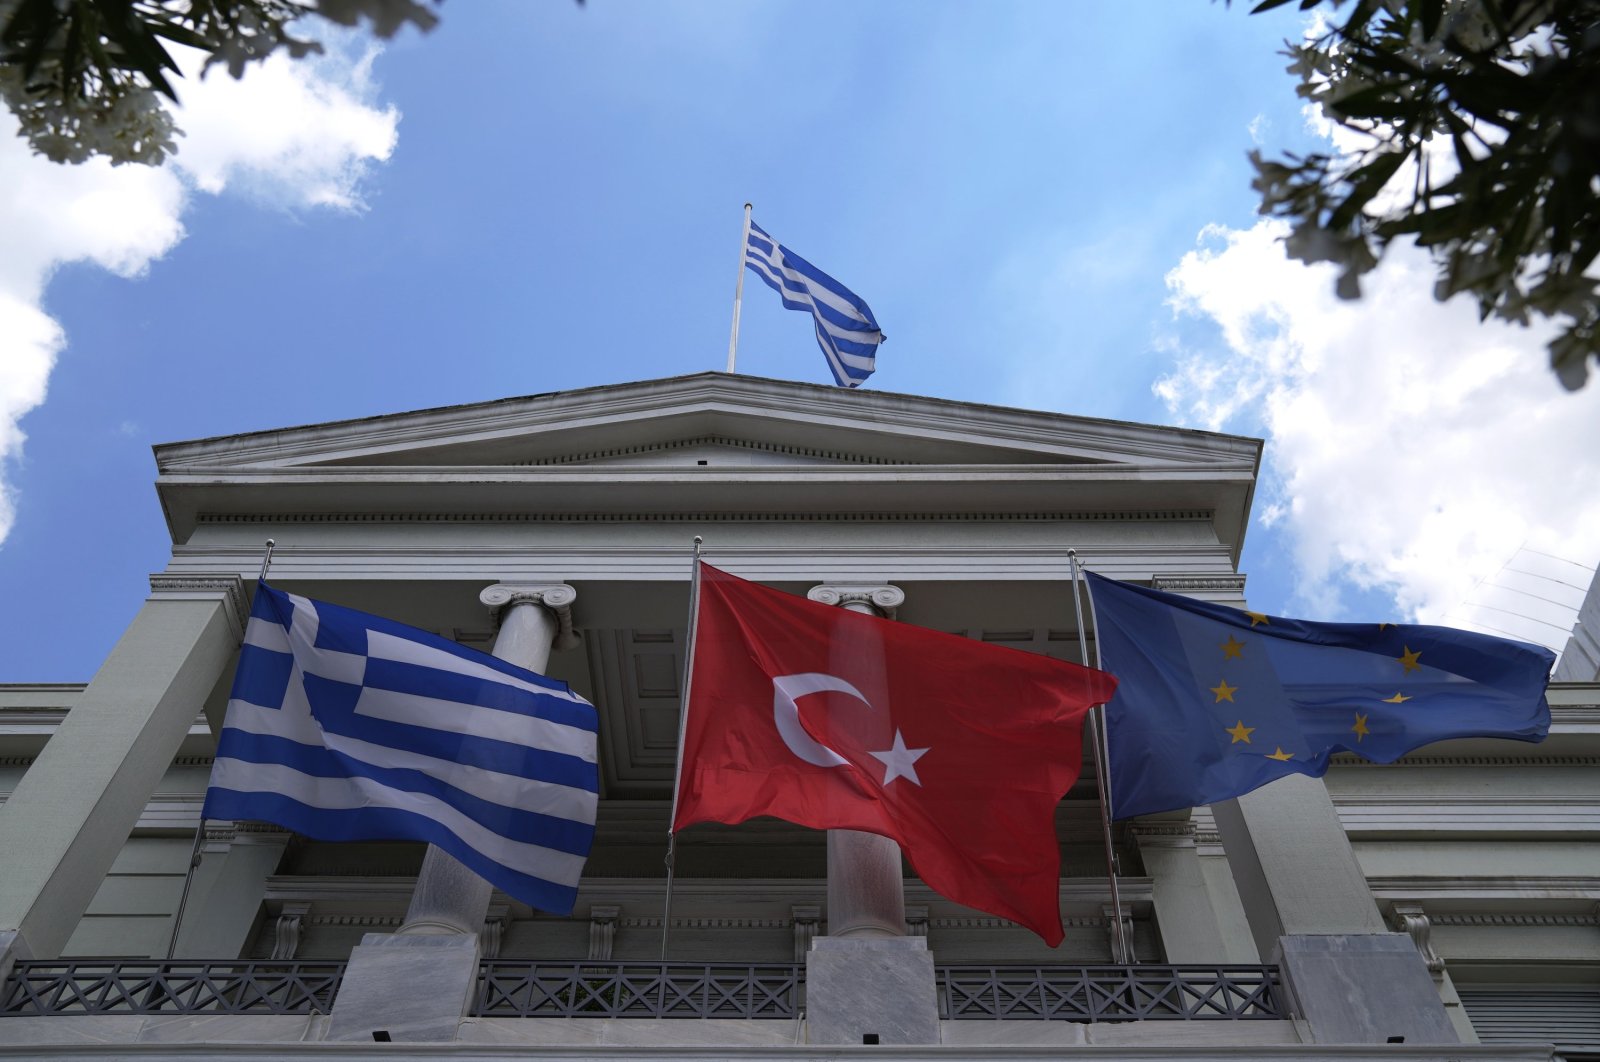 The Greek (L), Turkish (C) and European Union flags wave on the Greek Foreign Ministry house before a meeting of Foreign Minister Mevlüt Çavuşoğlu and his Greek counterpart Nikos Dendias in Athens, Greece, May 31, 2021. (AP File Photo)